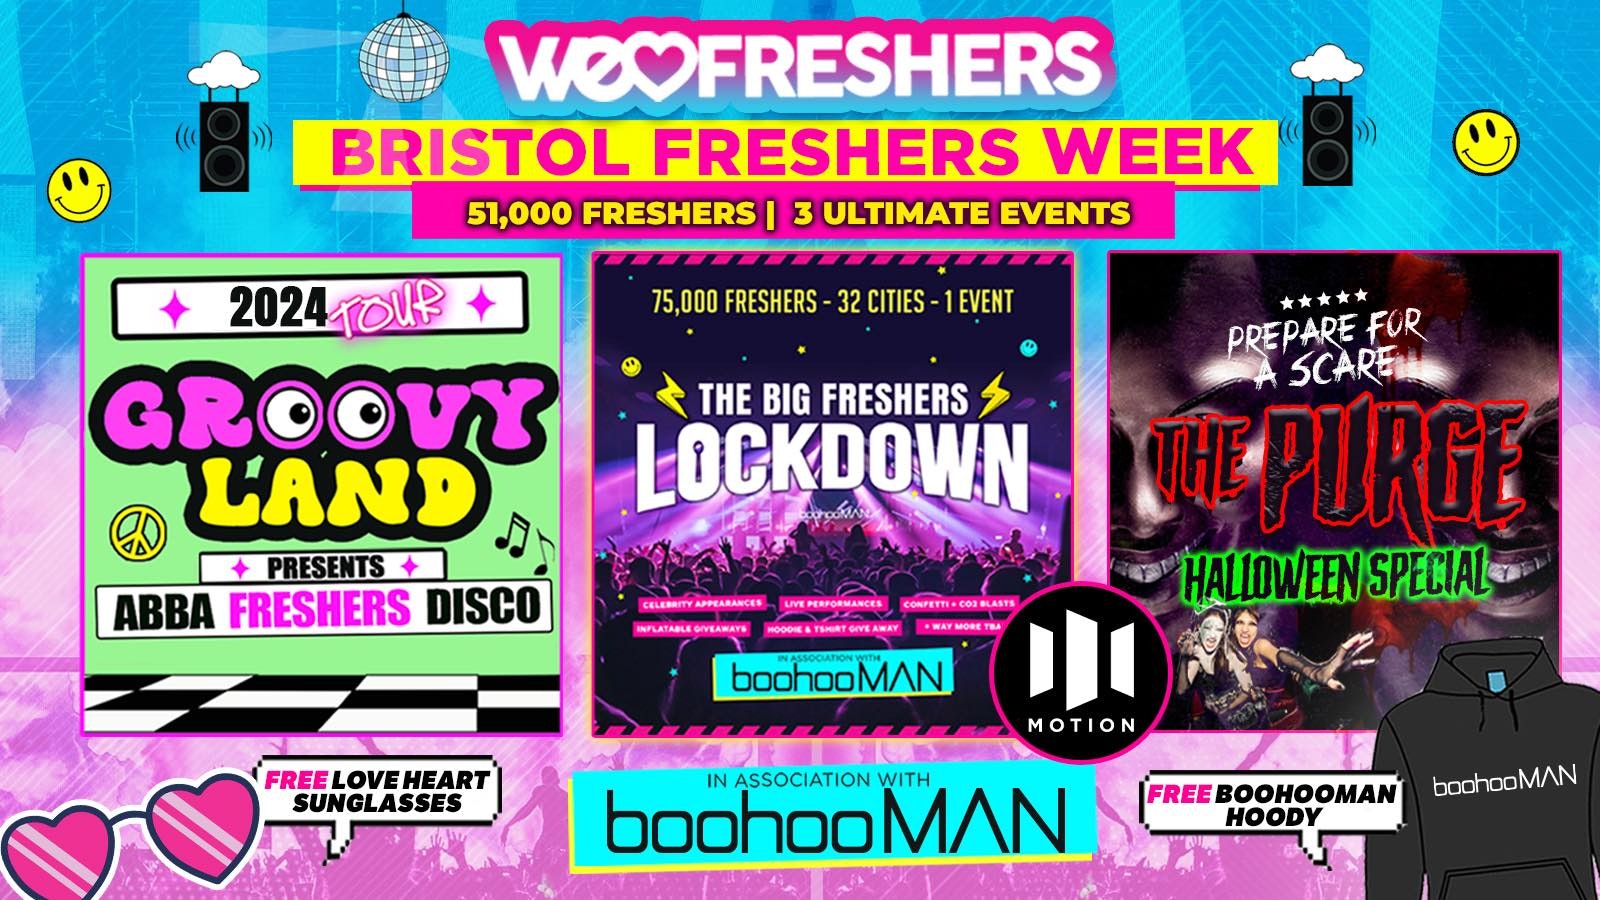 WE LOVE BRISTOL FRESHERS 2024 in association with boohooMAN  ❗3 EVENTS❗